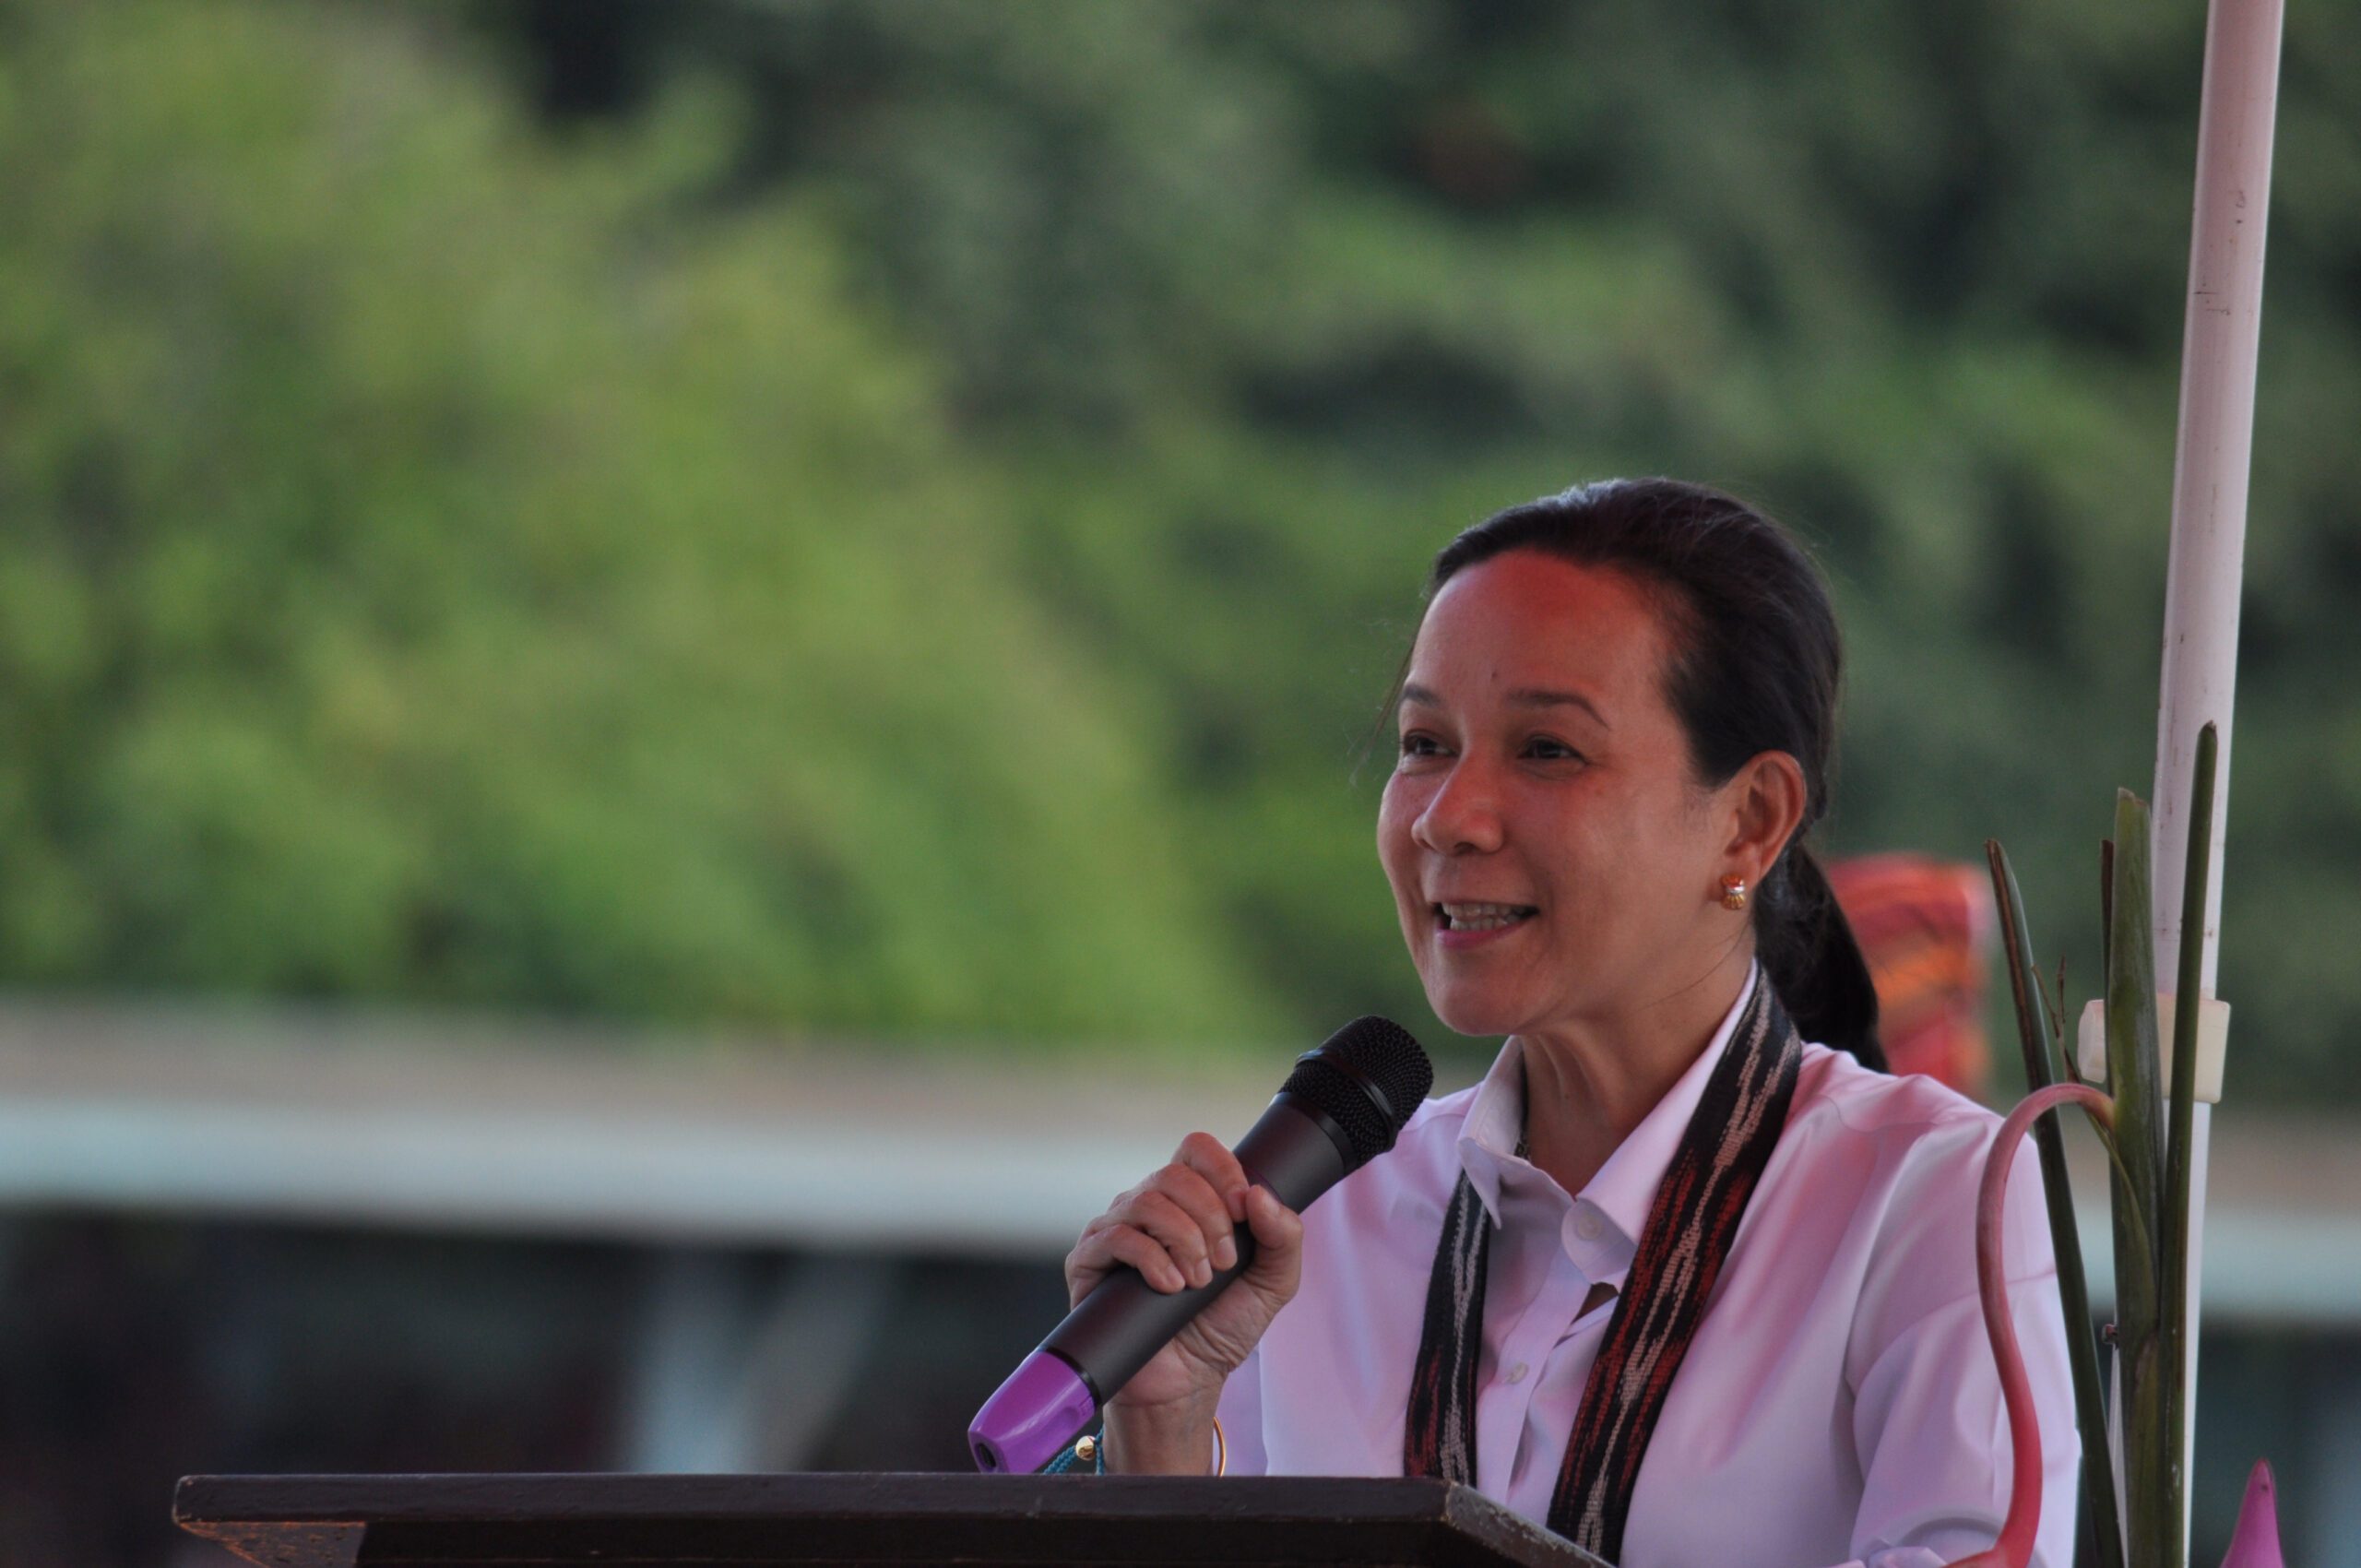 Poe: Inexperienced? I’ve been learning since childhood